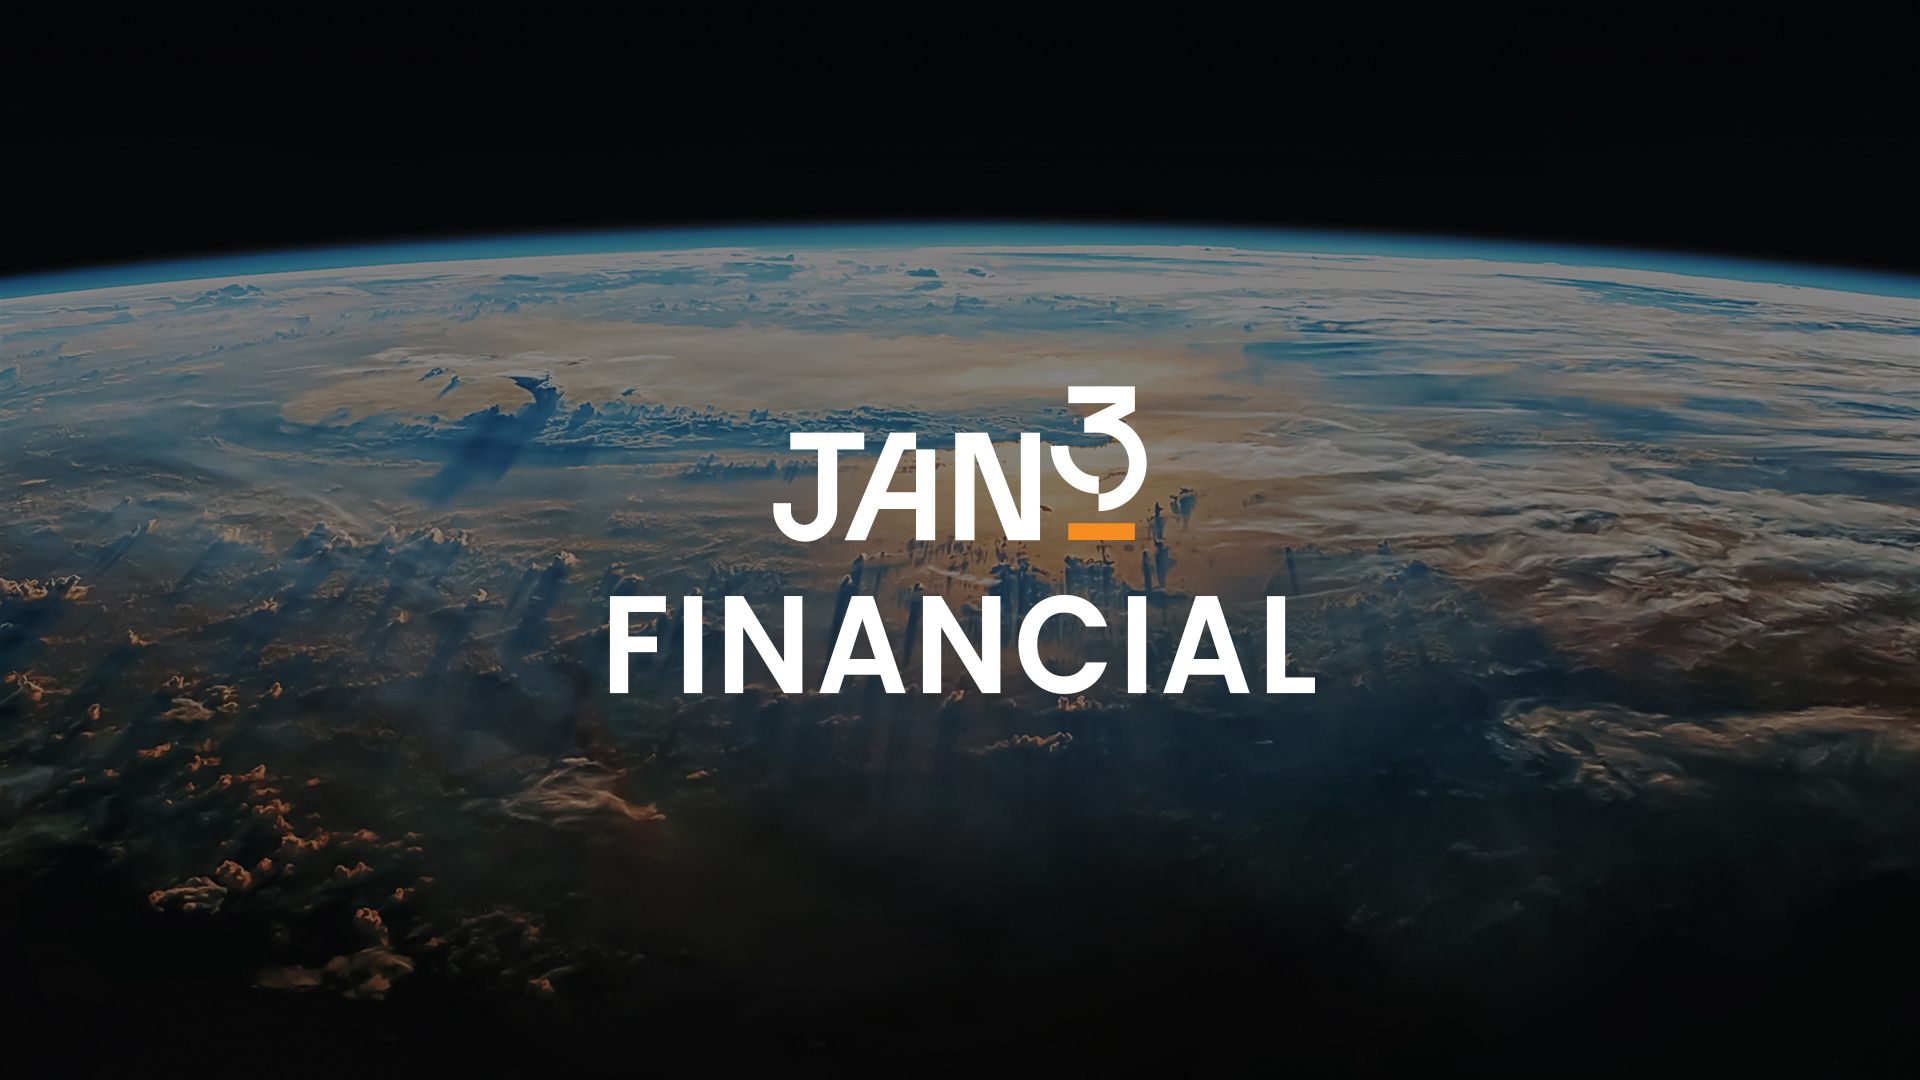 Planet earth view from space with JAN3 Financial logo on top